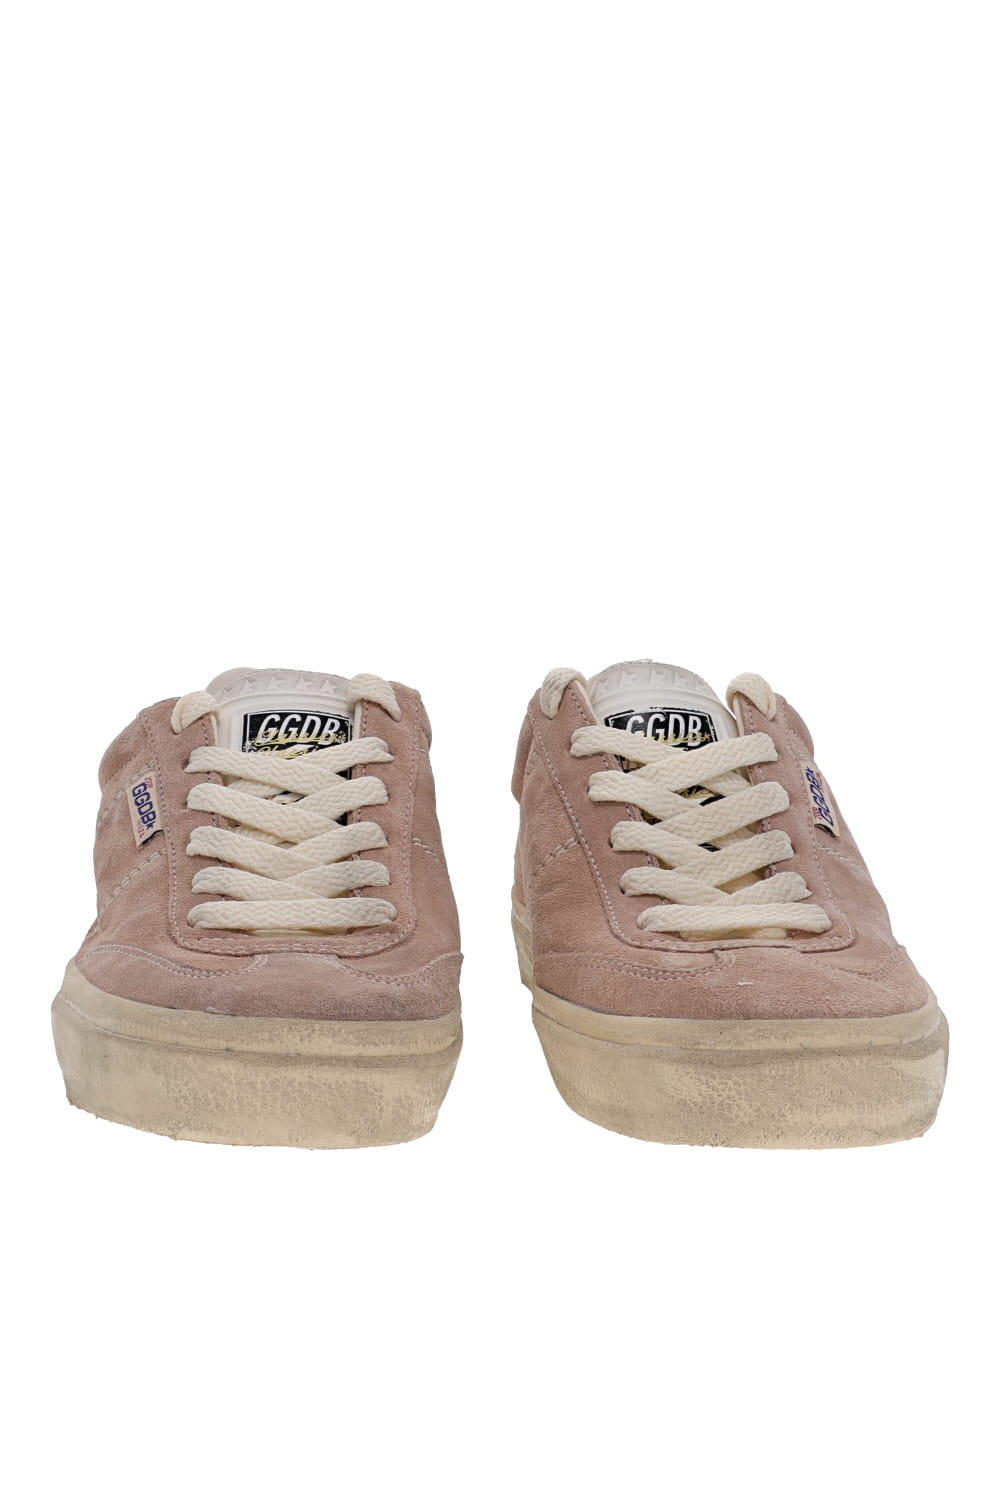 Soul Star Powder Pink Suede Leather Sneakers